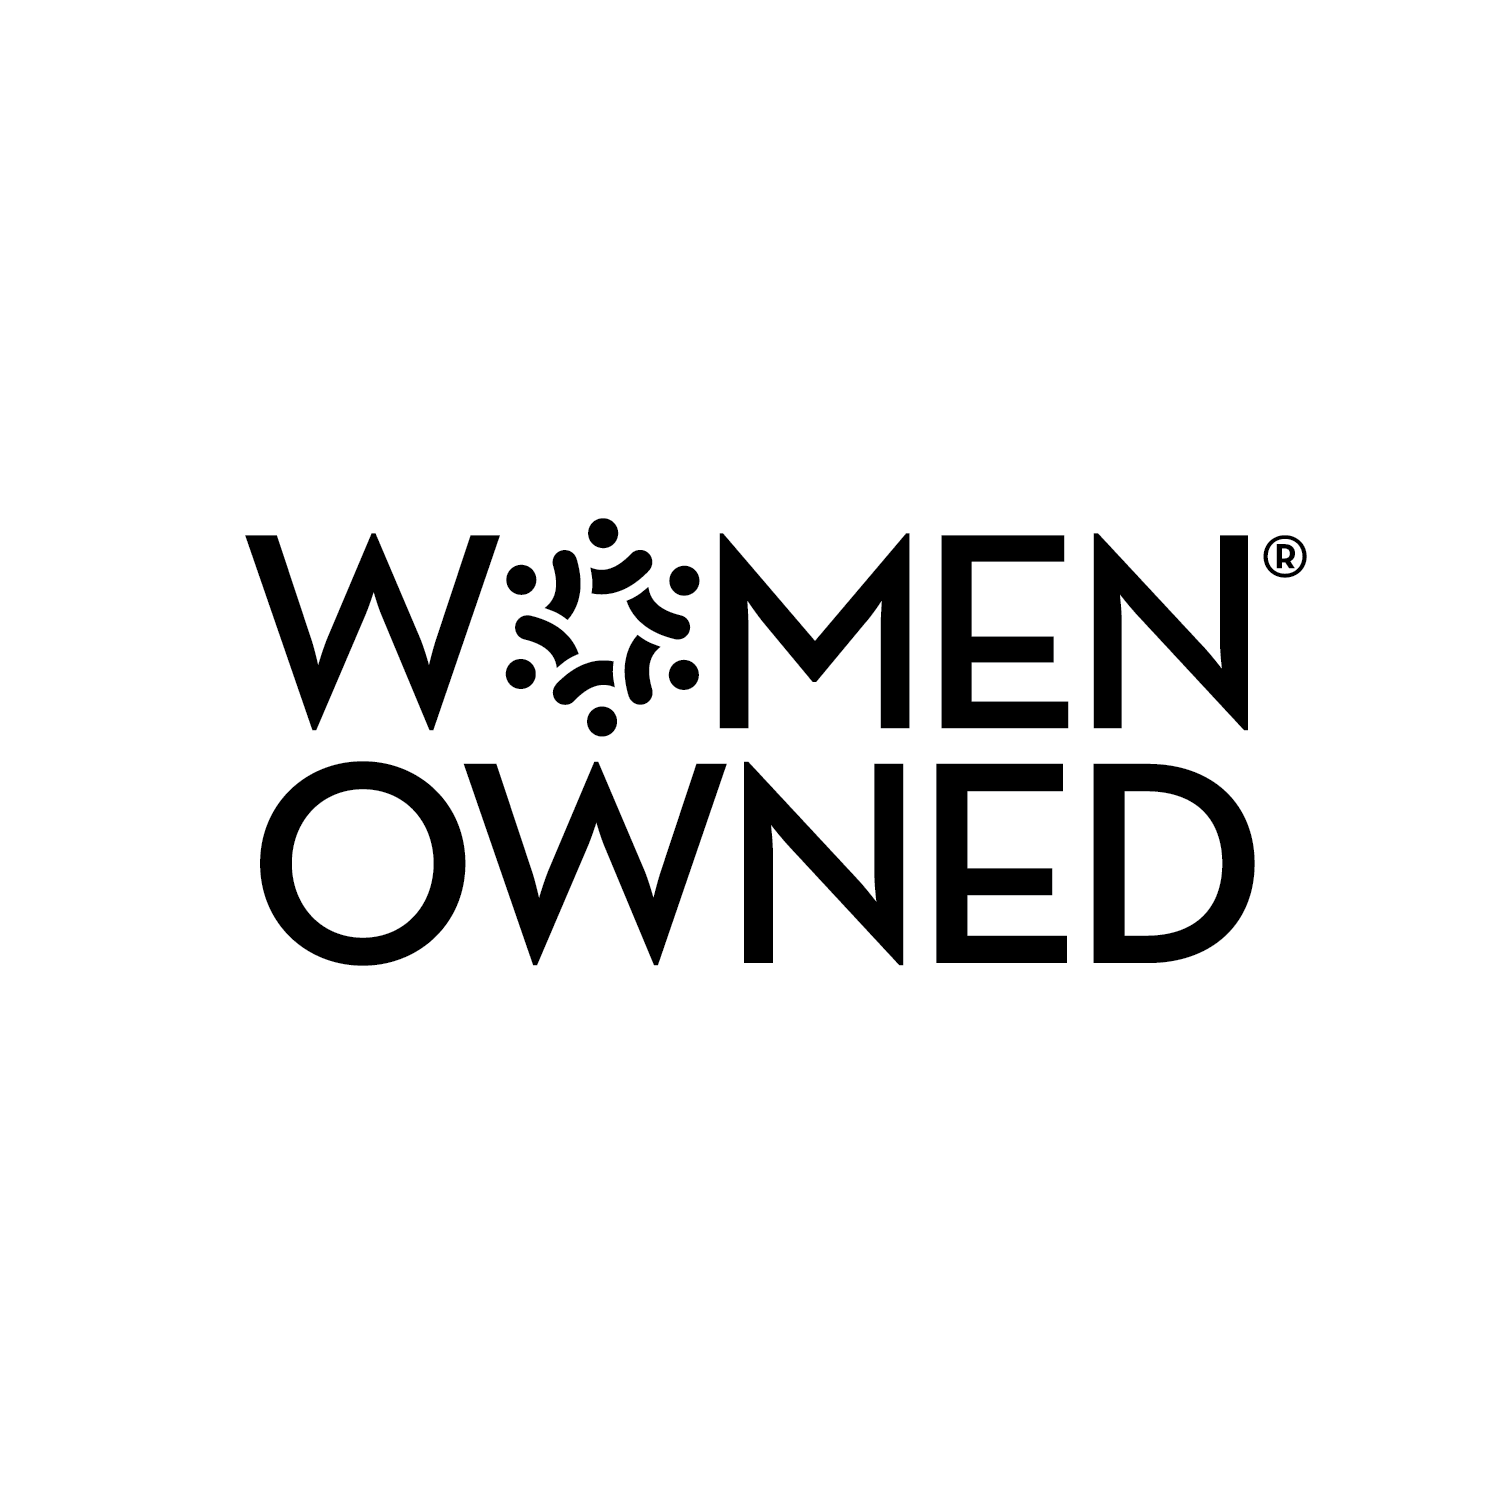 Women Owned Certification Logo. White circle image with black text that says women owned.